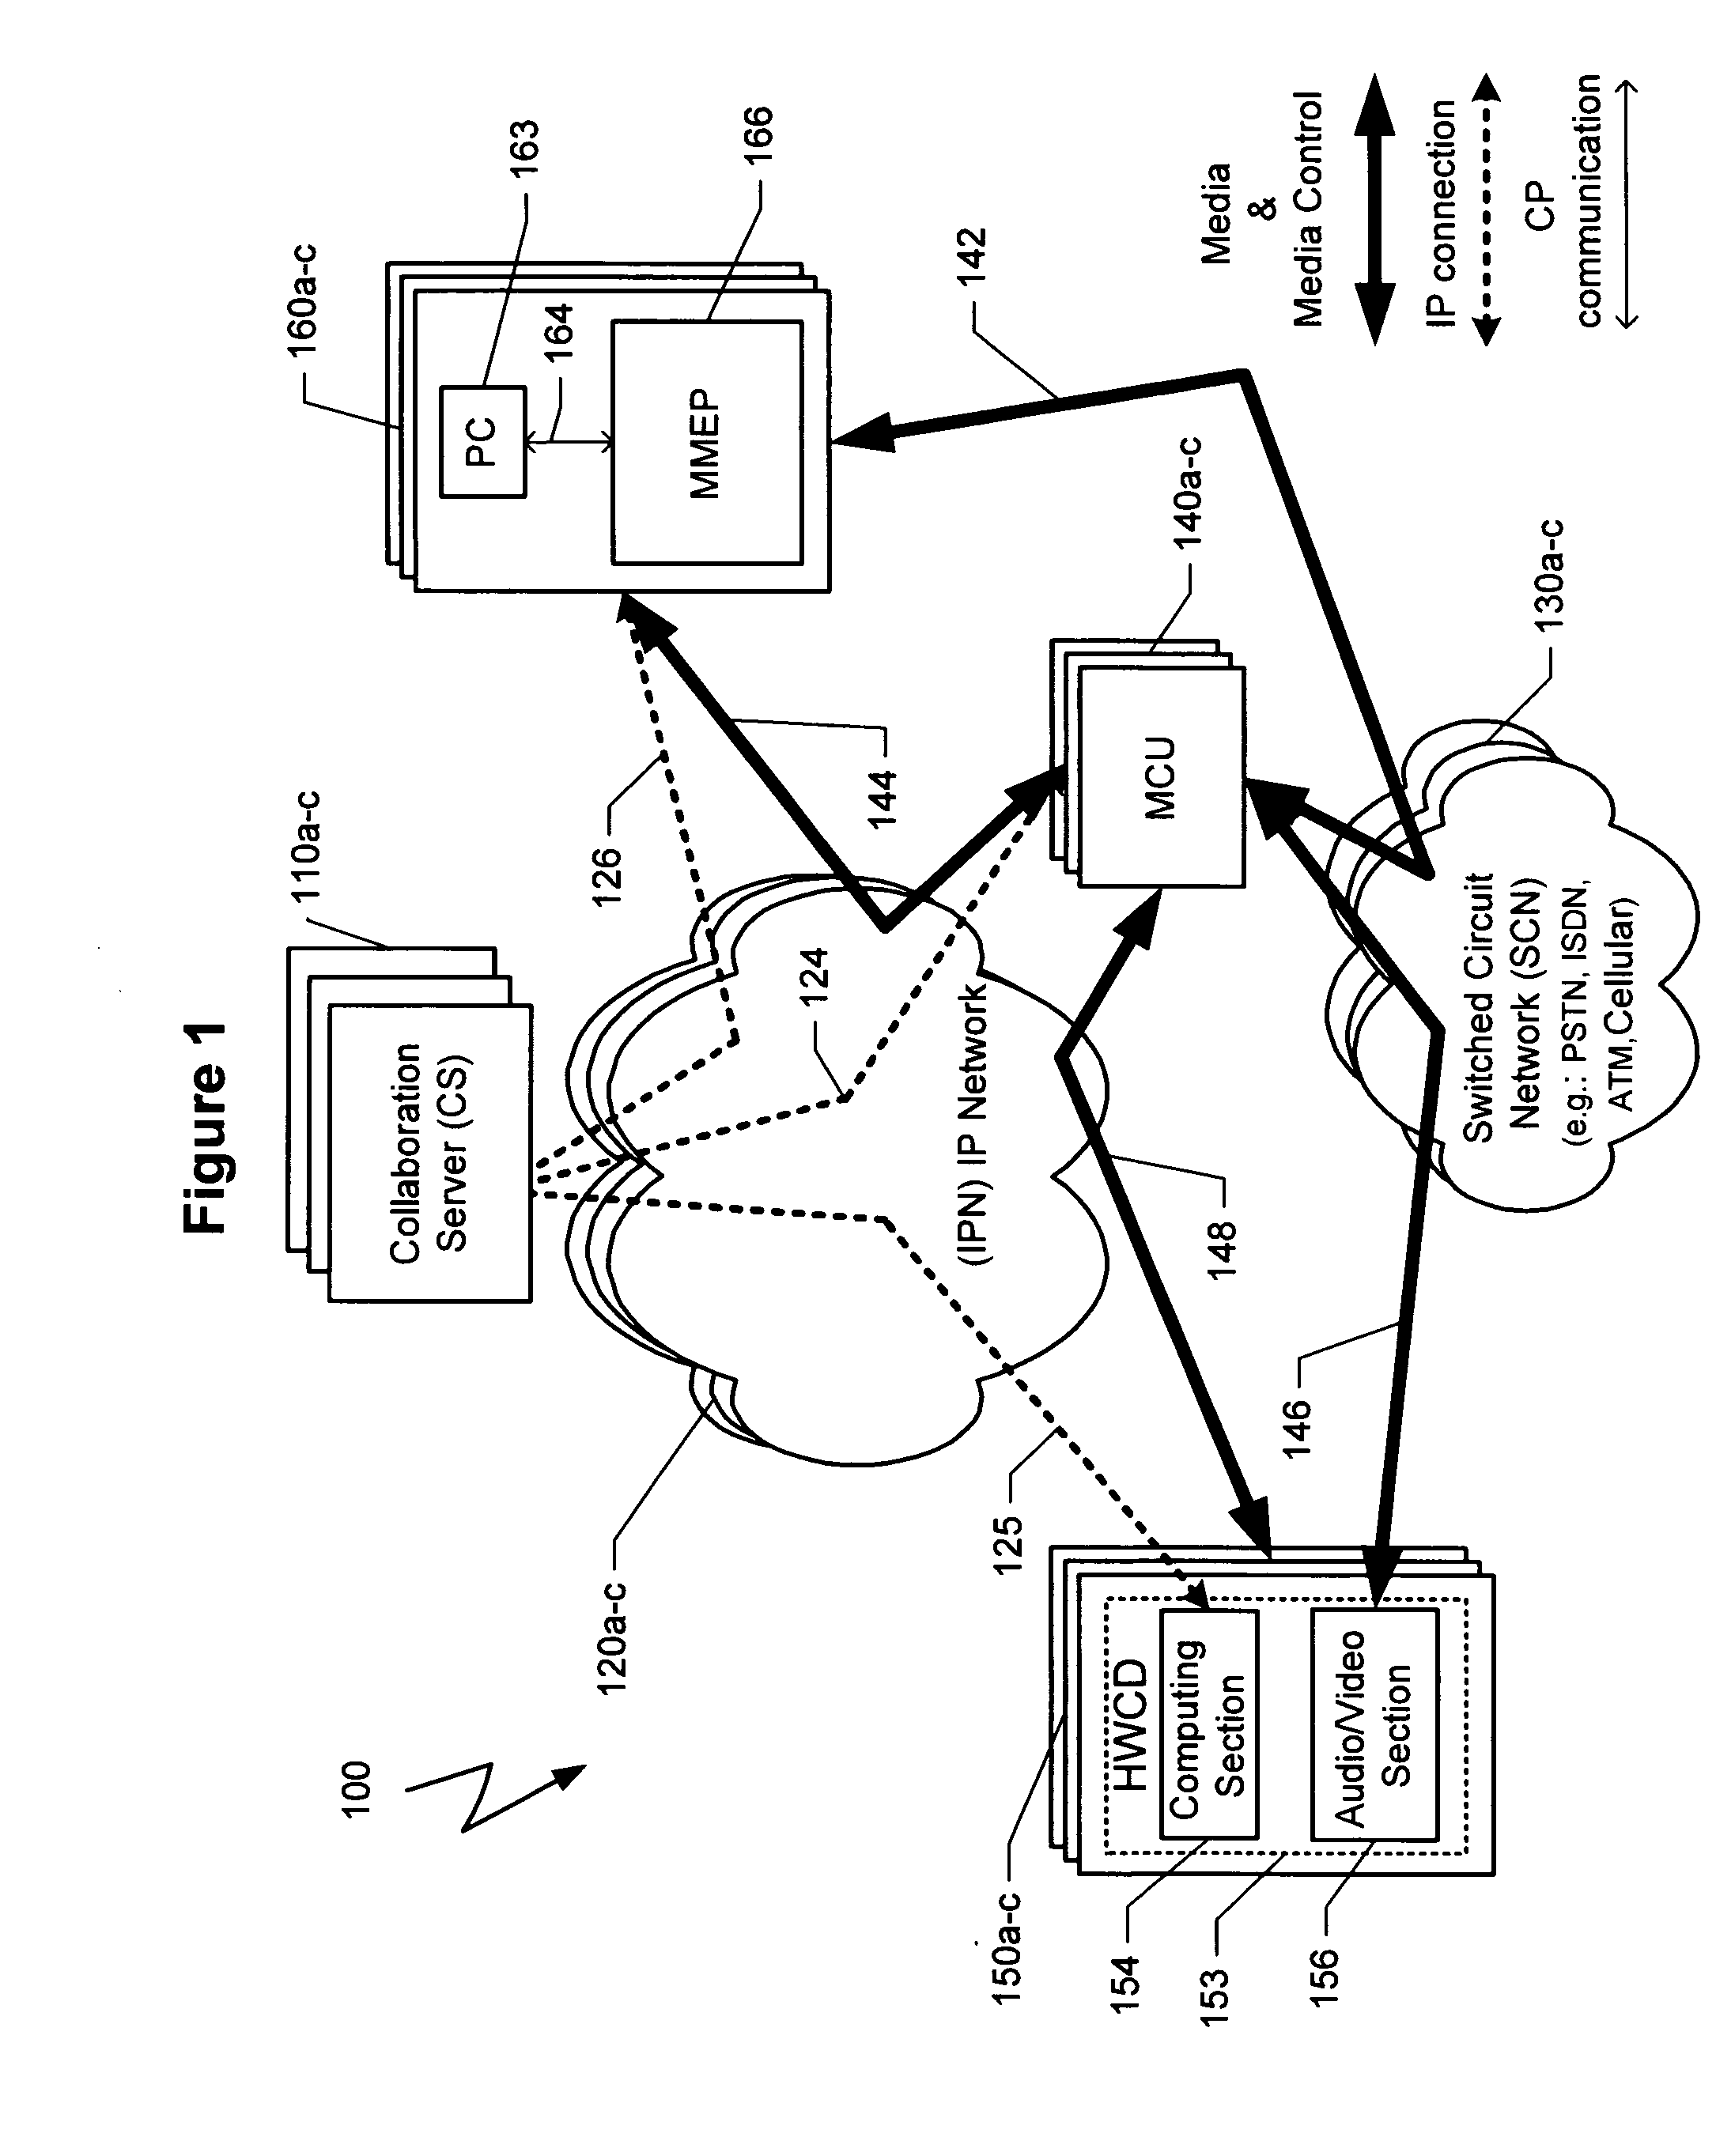 Method and system for information collaboration over an IP network via handheld wireless communication devices